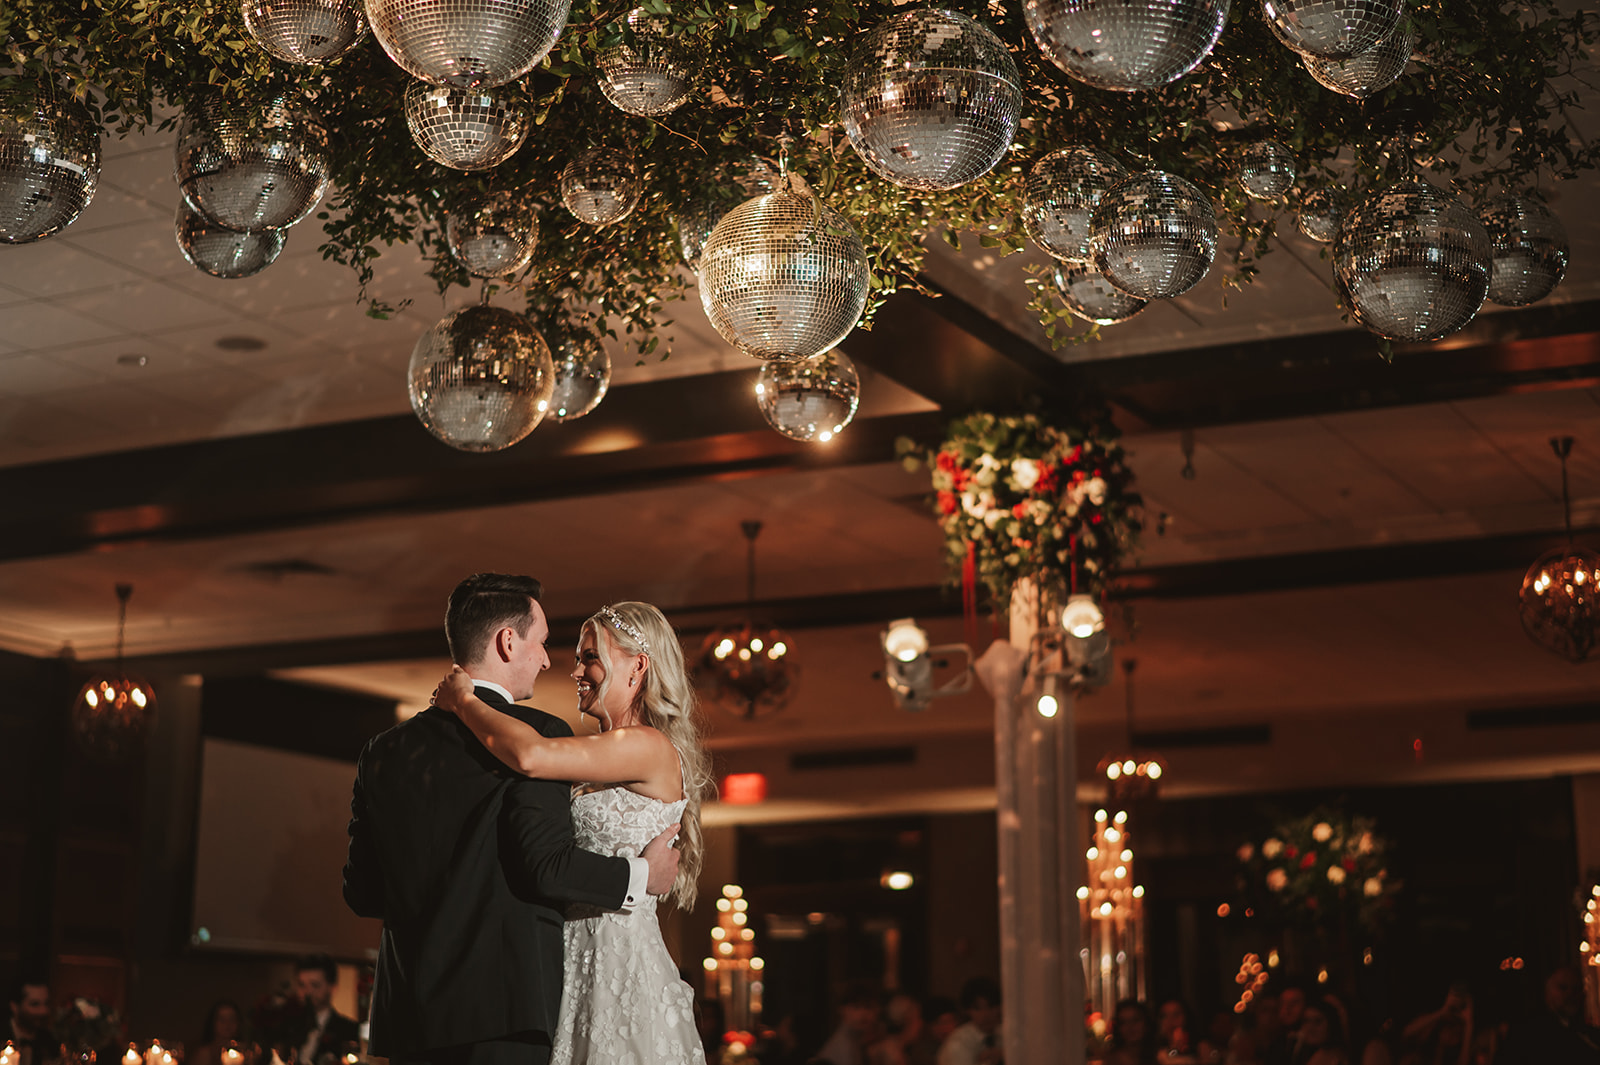 Chevy Chase Country Club Wedding Photo - reception photos, first dance with smoke and disco balls